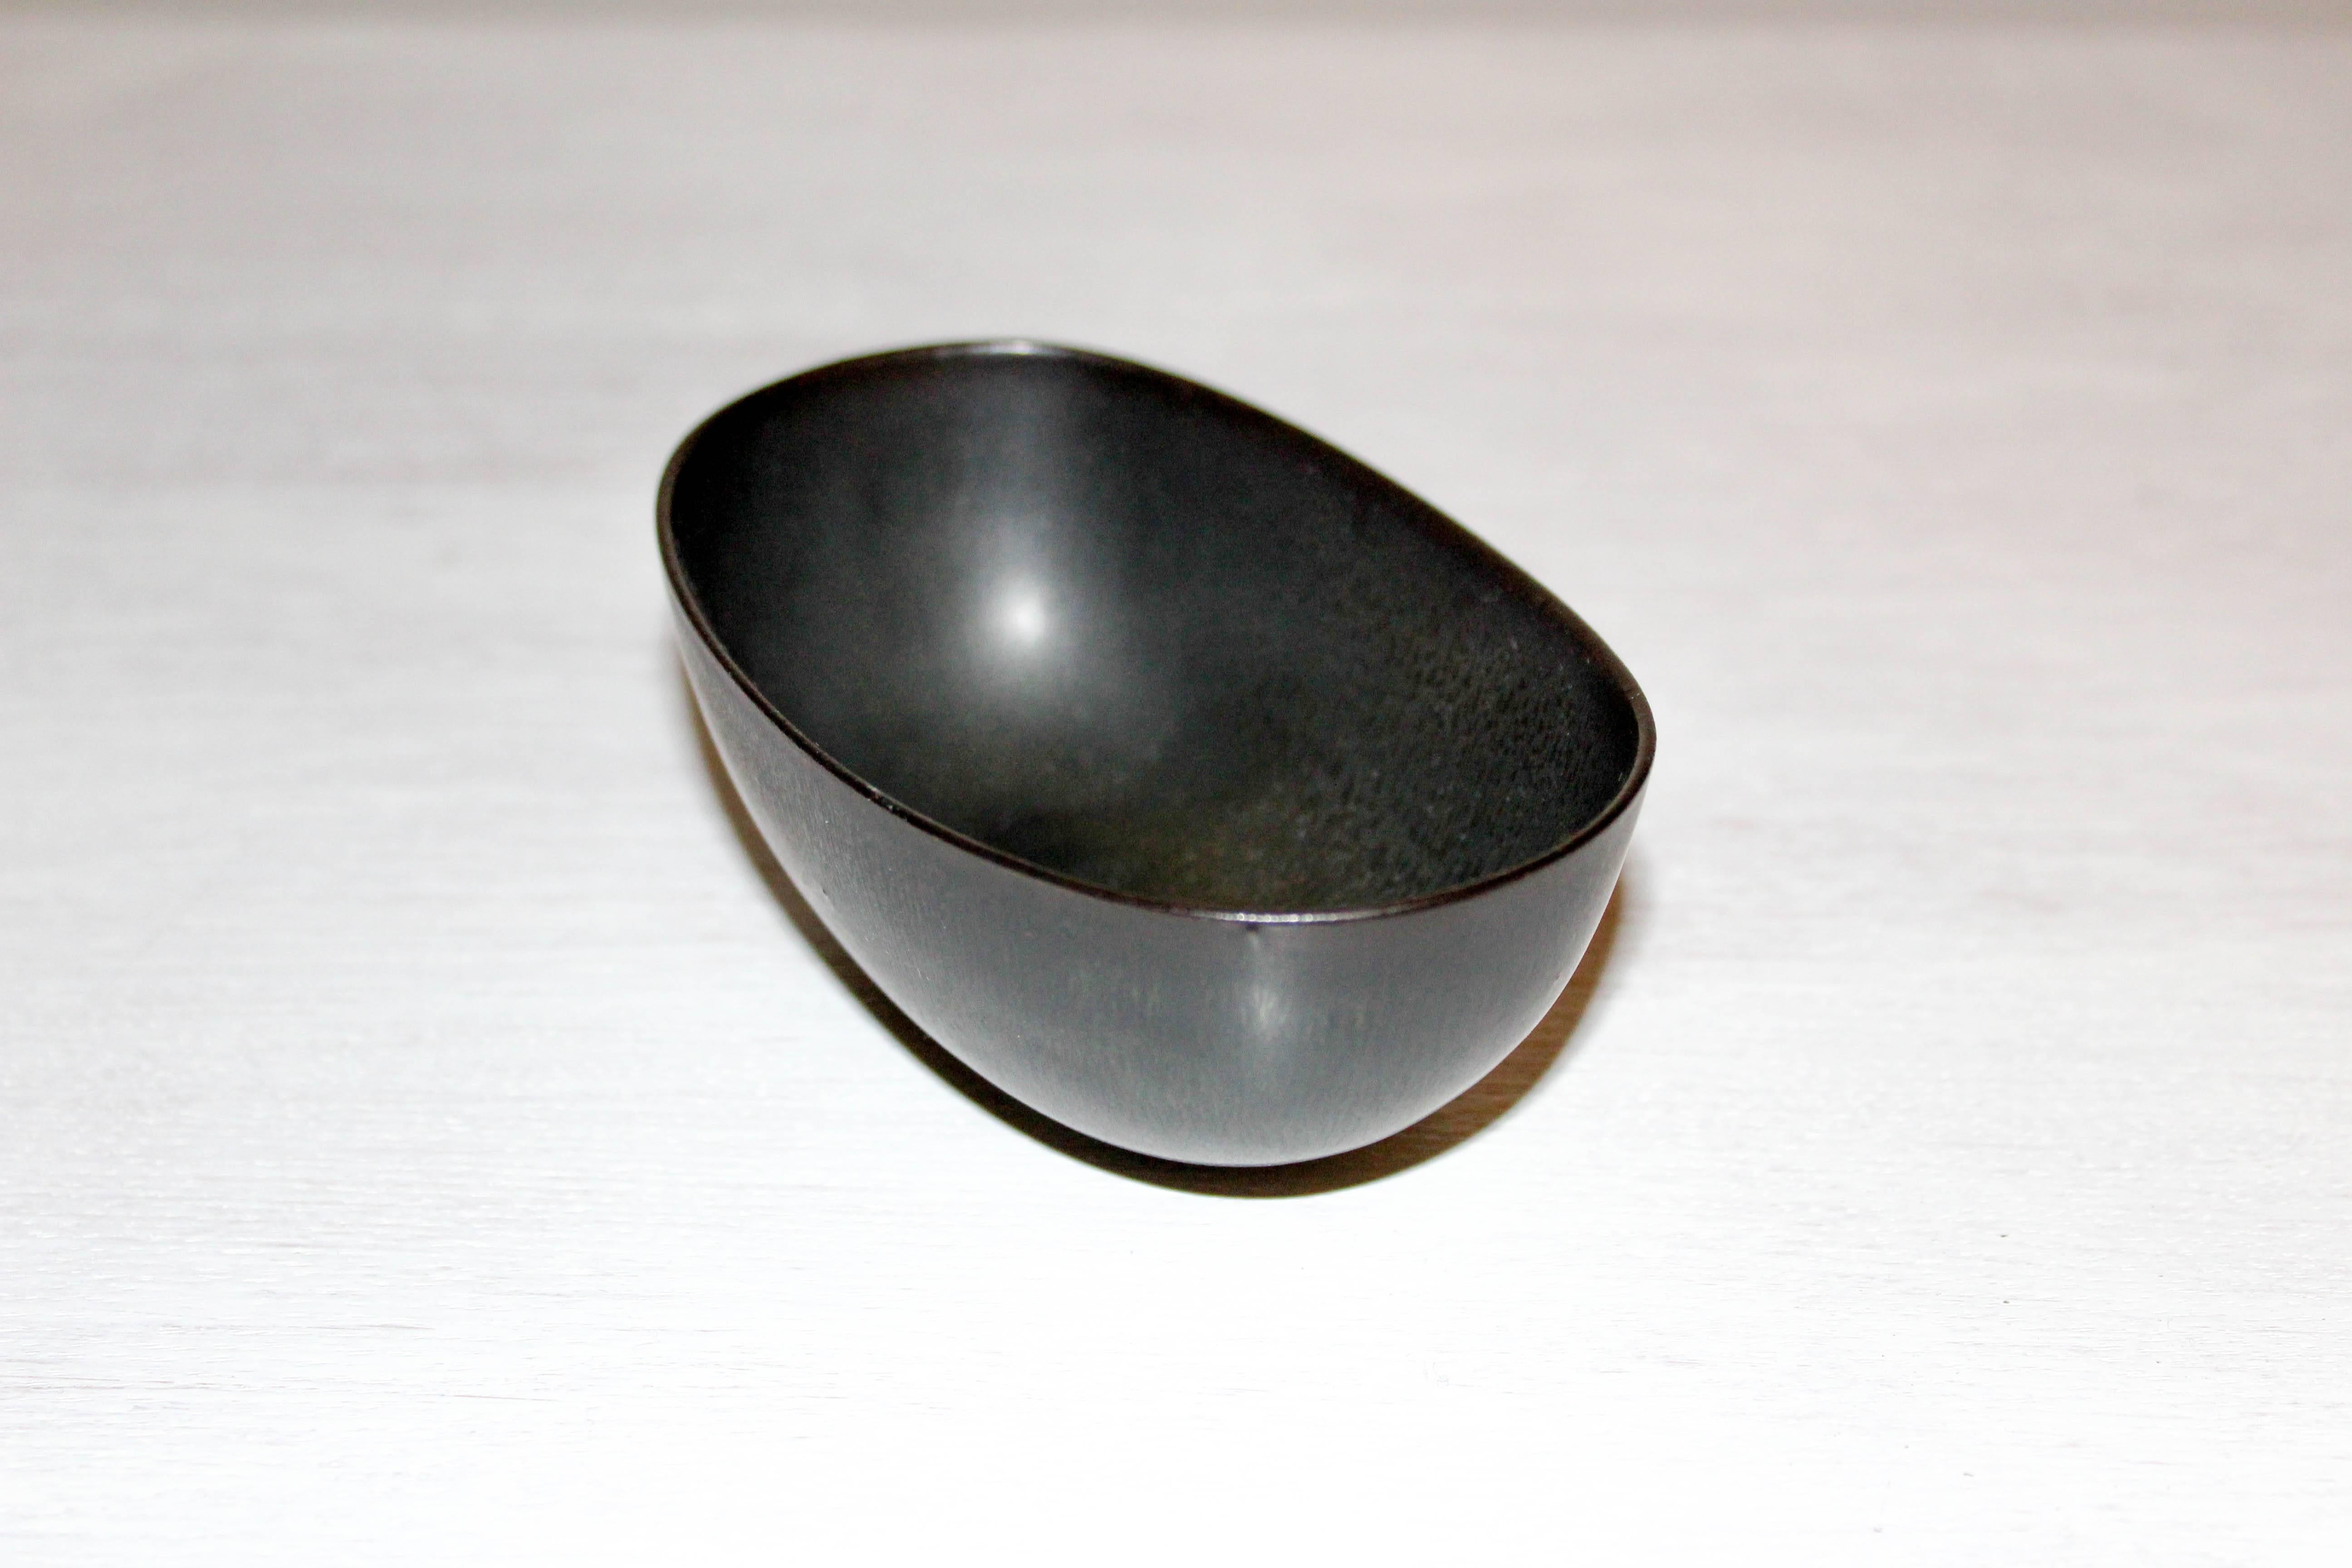 Midcentury ceramic miniature bowl by Swedish designer Carl Harry Stålhane for Rörstrands. This small black bowl is minimalistic and decorative. Good vintage condition with minor signs of usage.